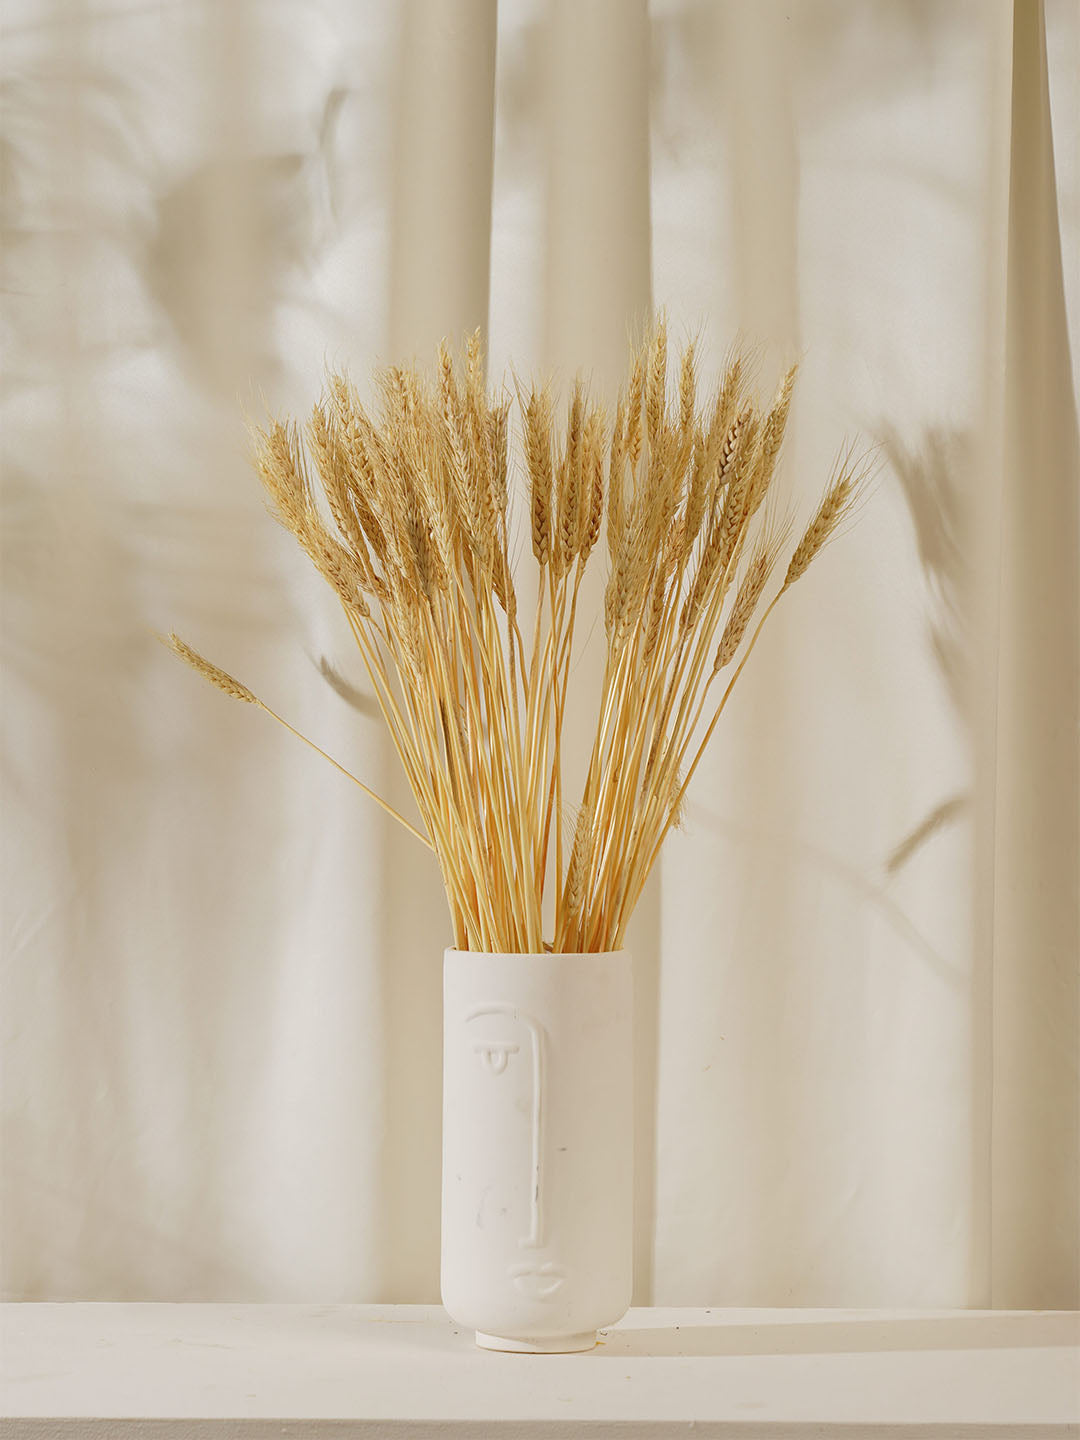 Jizo Japanese Face Vase And Dried Wheat Grass Stems Combo